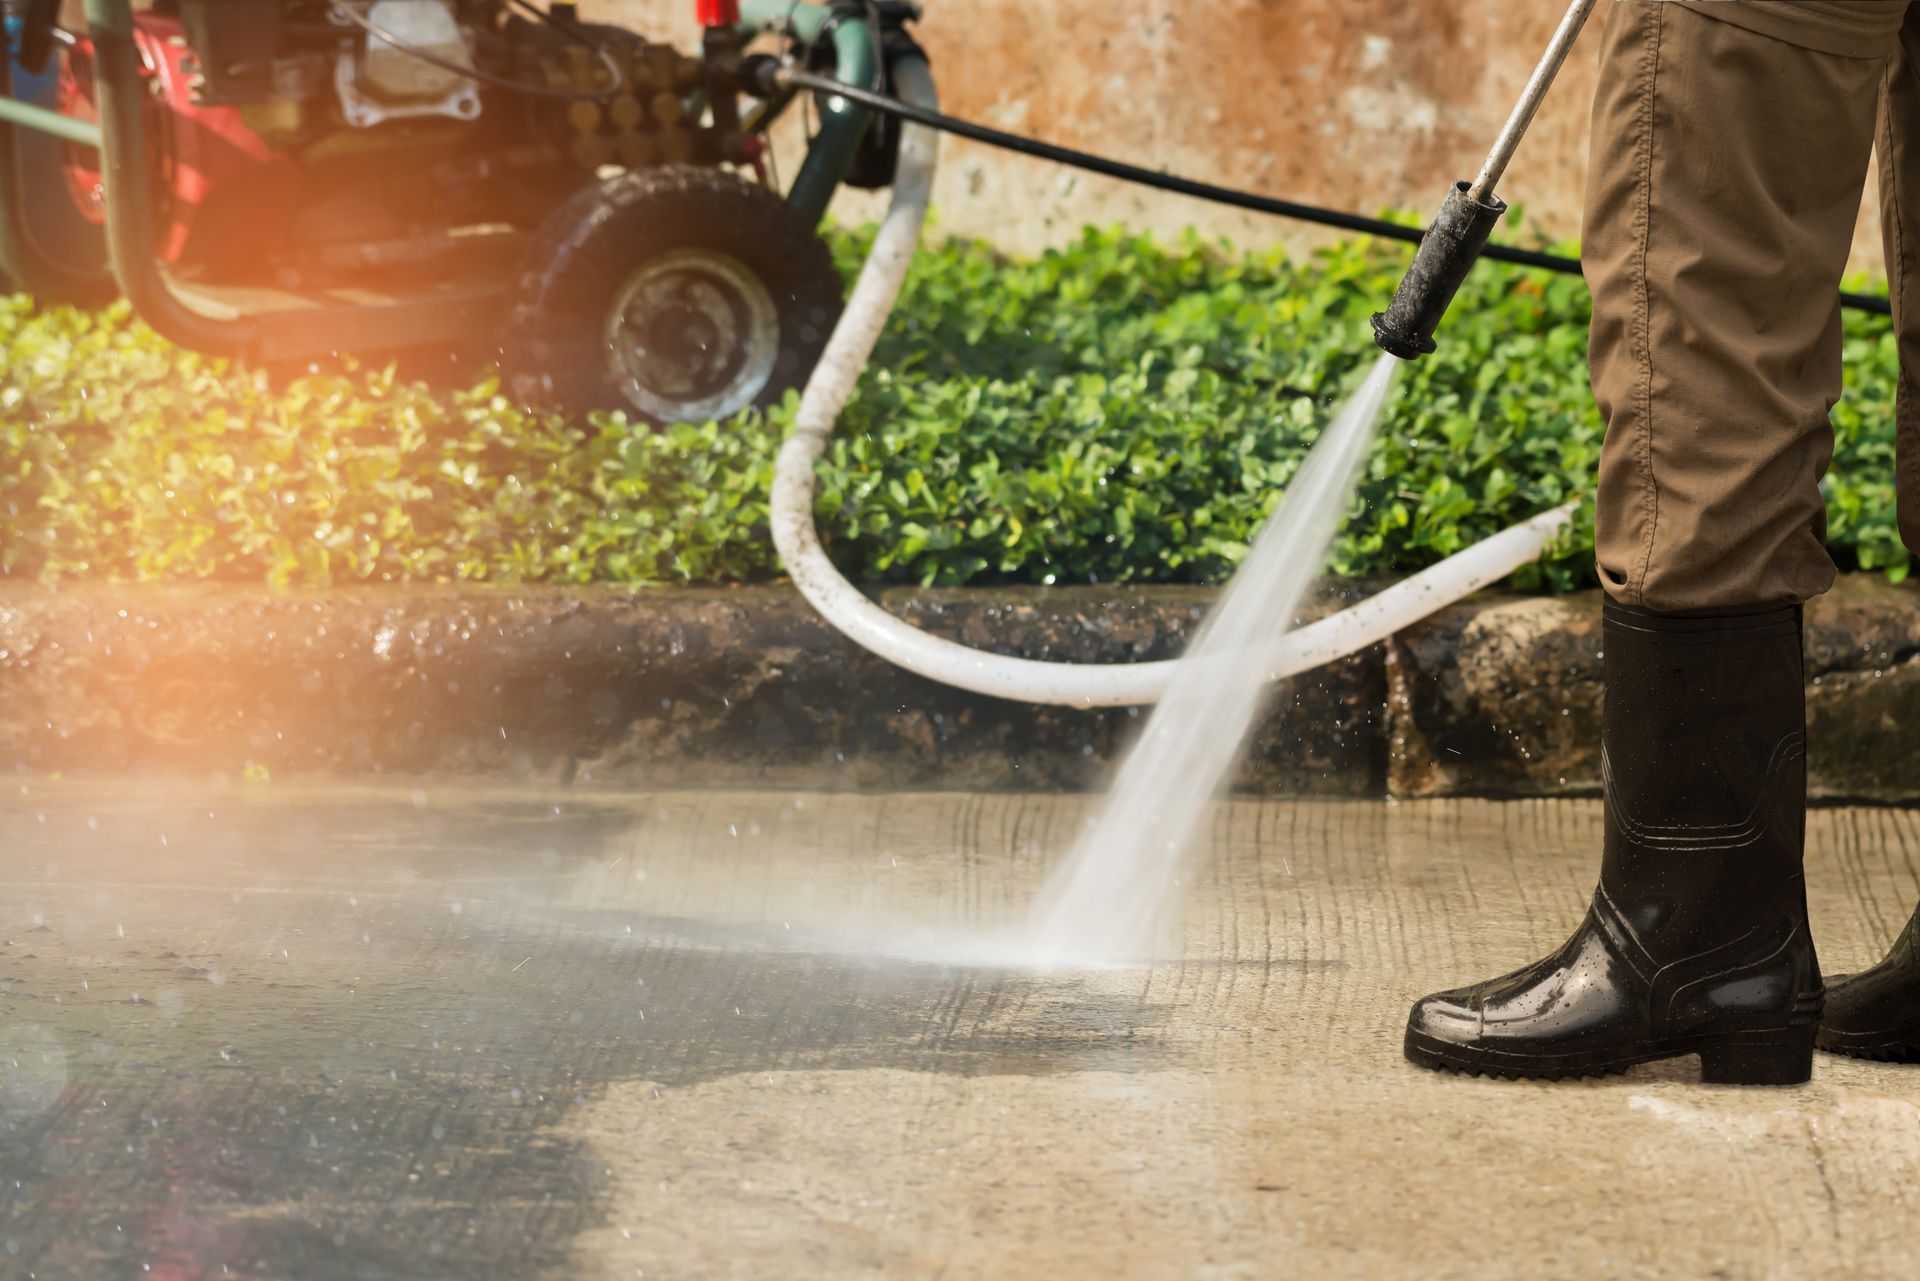 A worker using a high-pressure gasoline washer to deeply clean a driveway, providing professional pressure washing services.